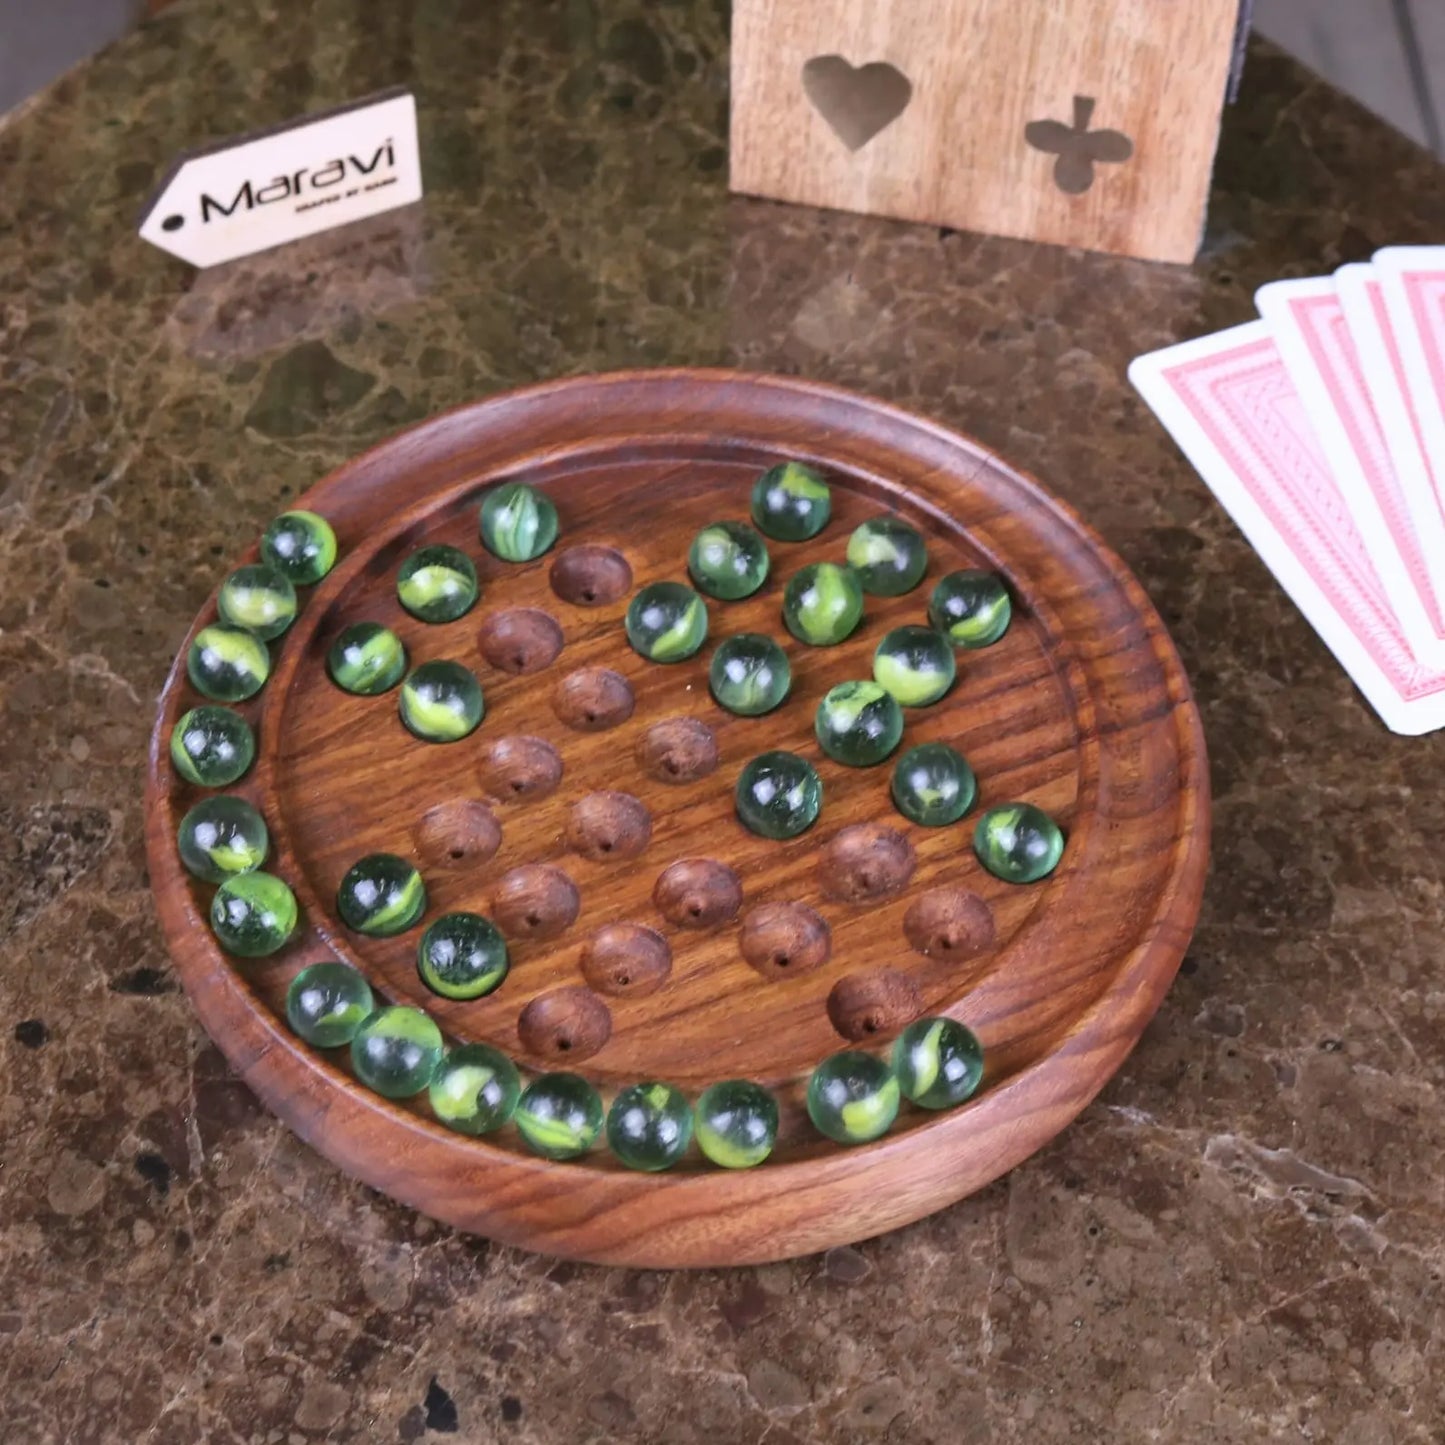 Cholang Solitaire Game Set - Being Played